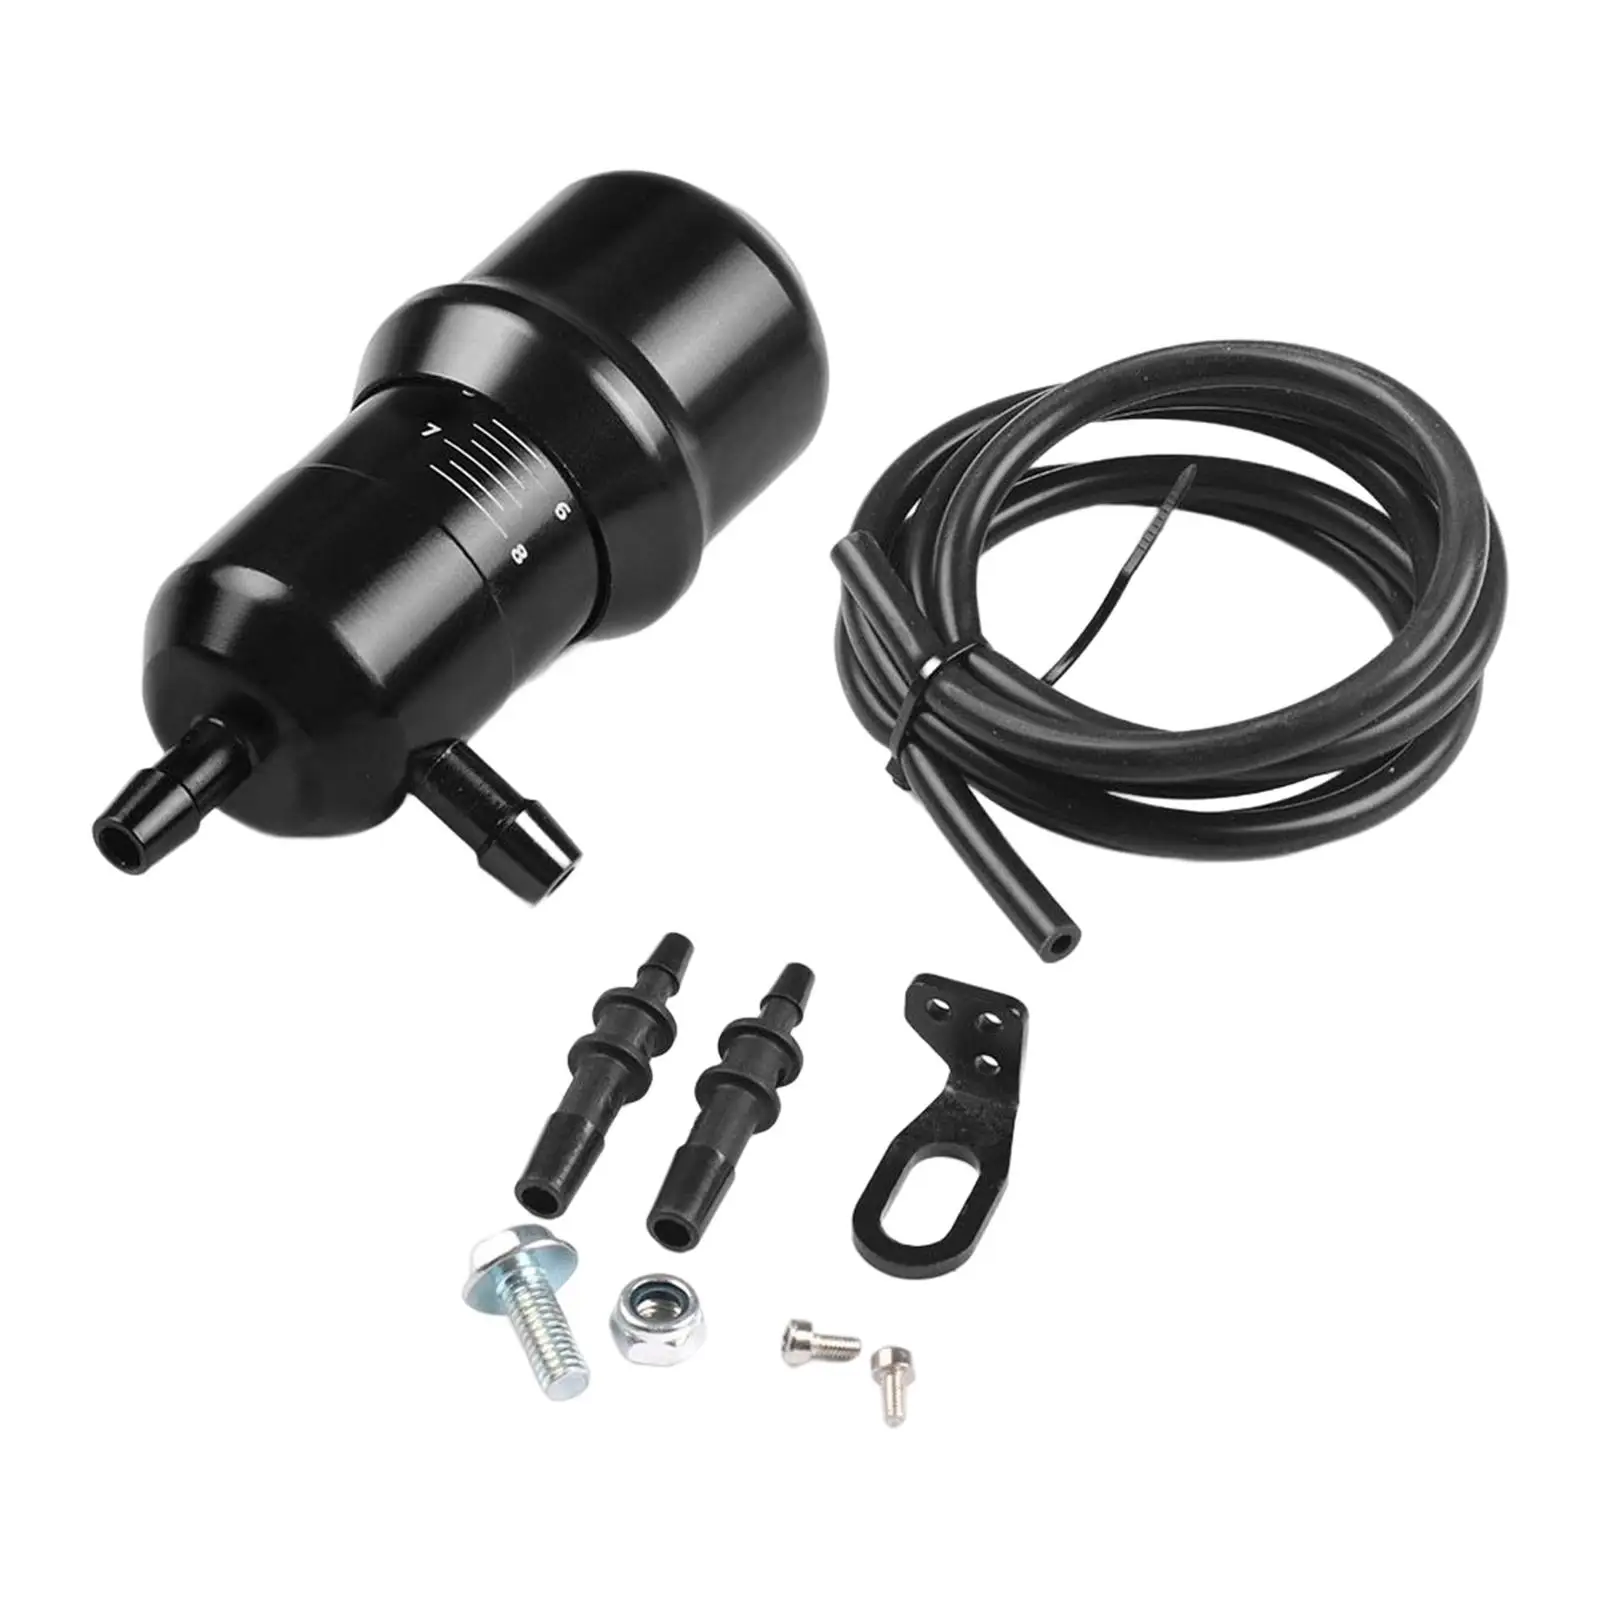 Manual Boost Controller PSI Boost Bleed Vehicle Parts